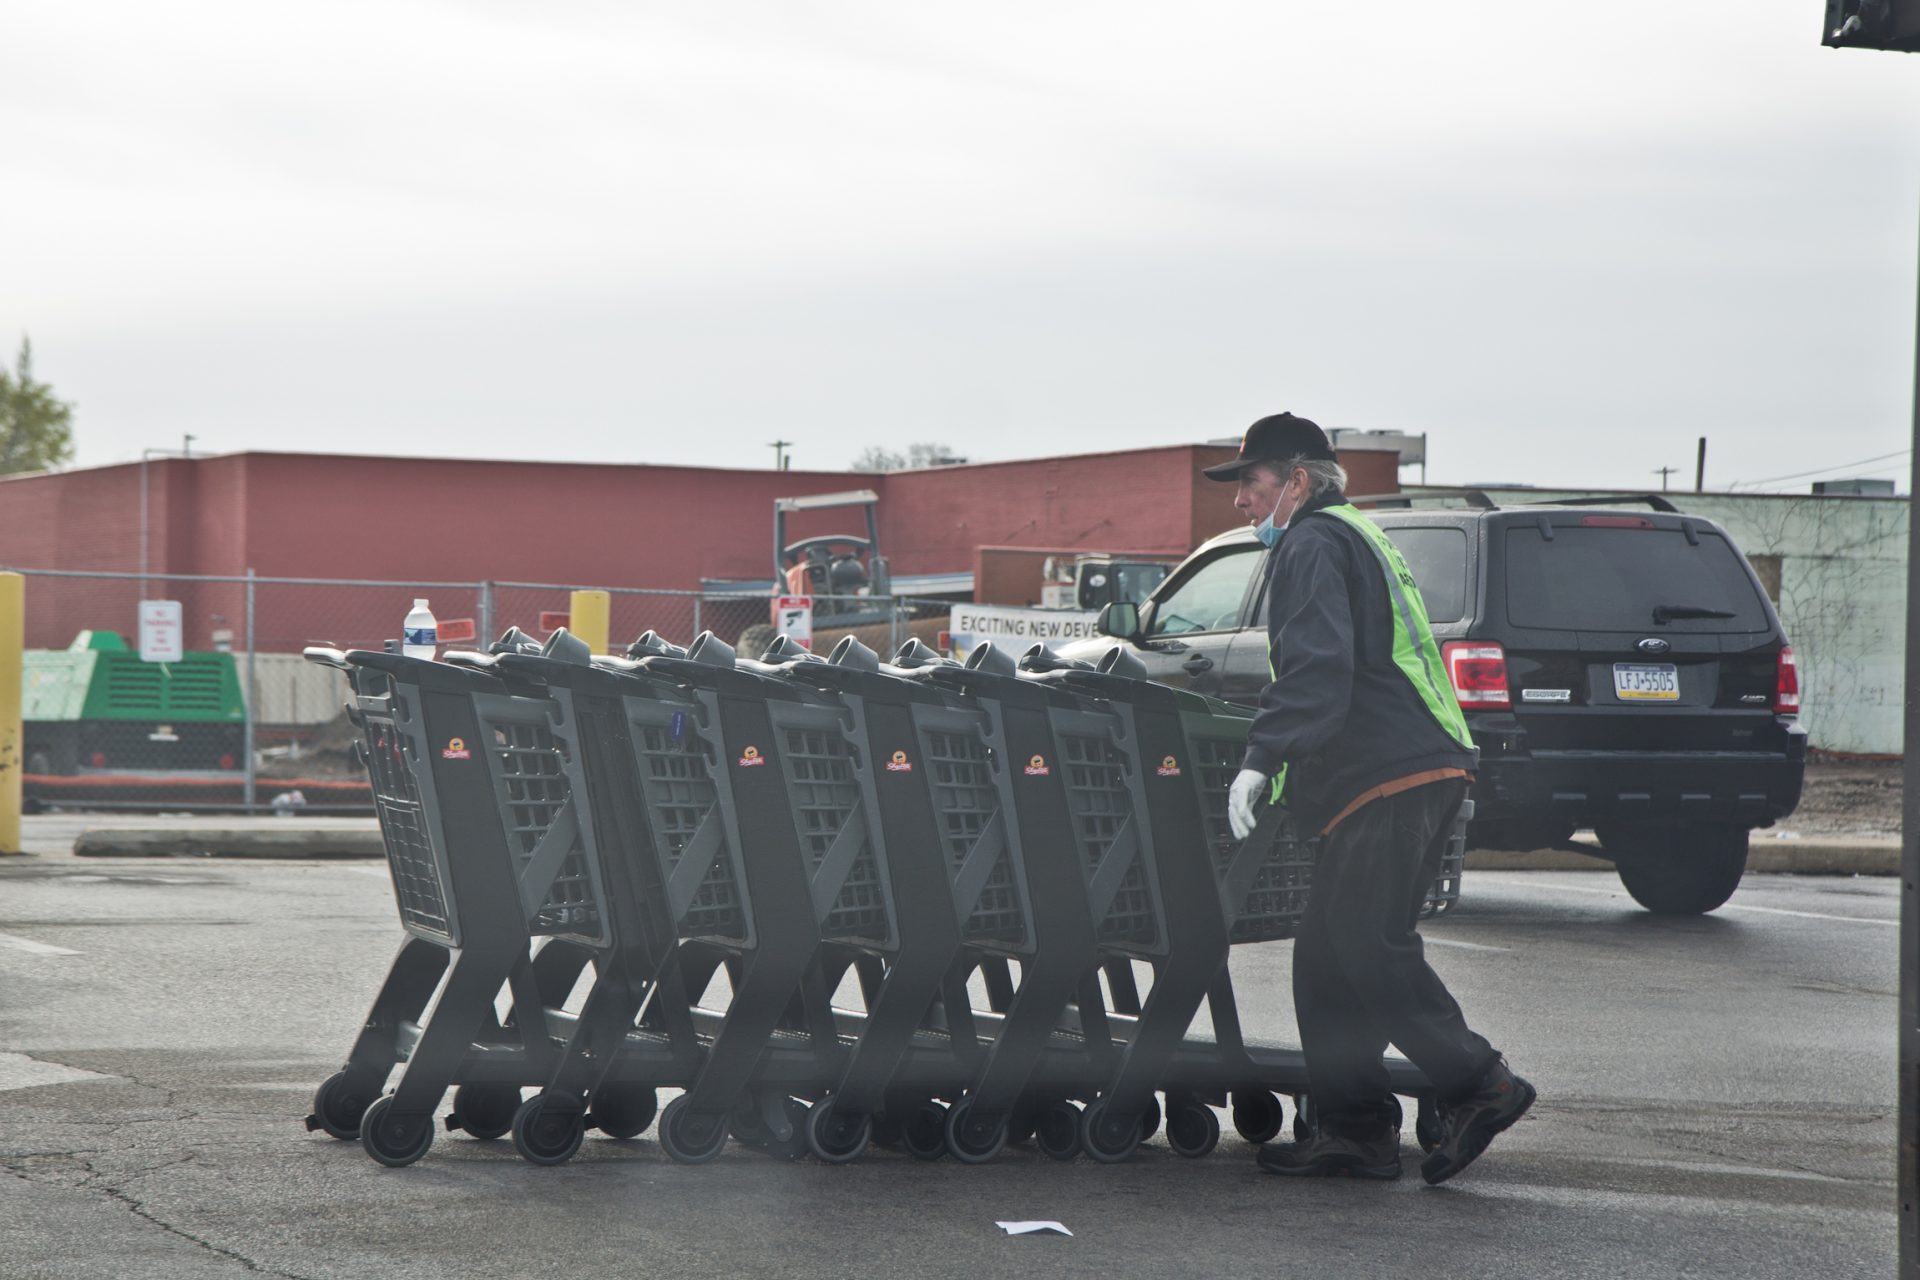 A Shop Rite employee returns carts to a port at the grocery store at 24th and Oregon Wednesday.